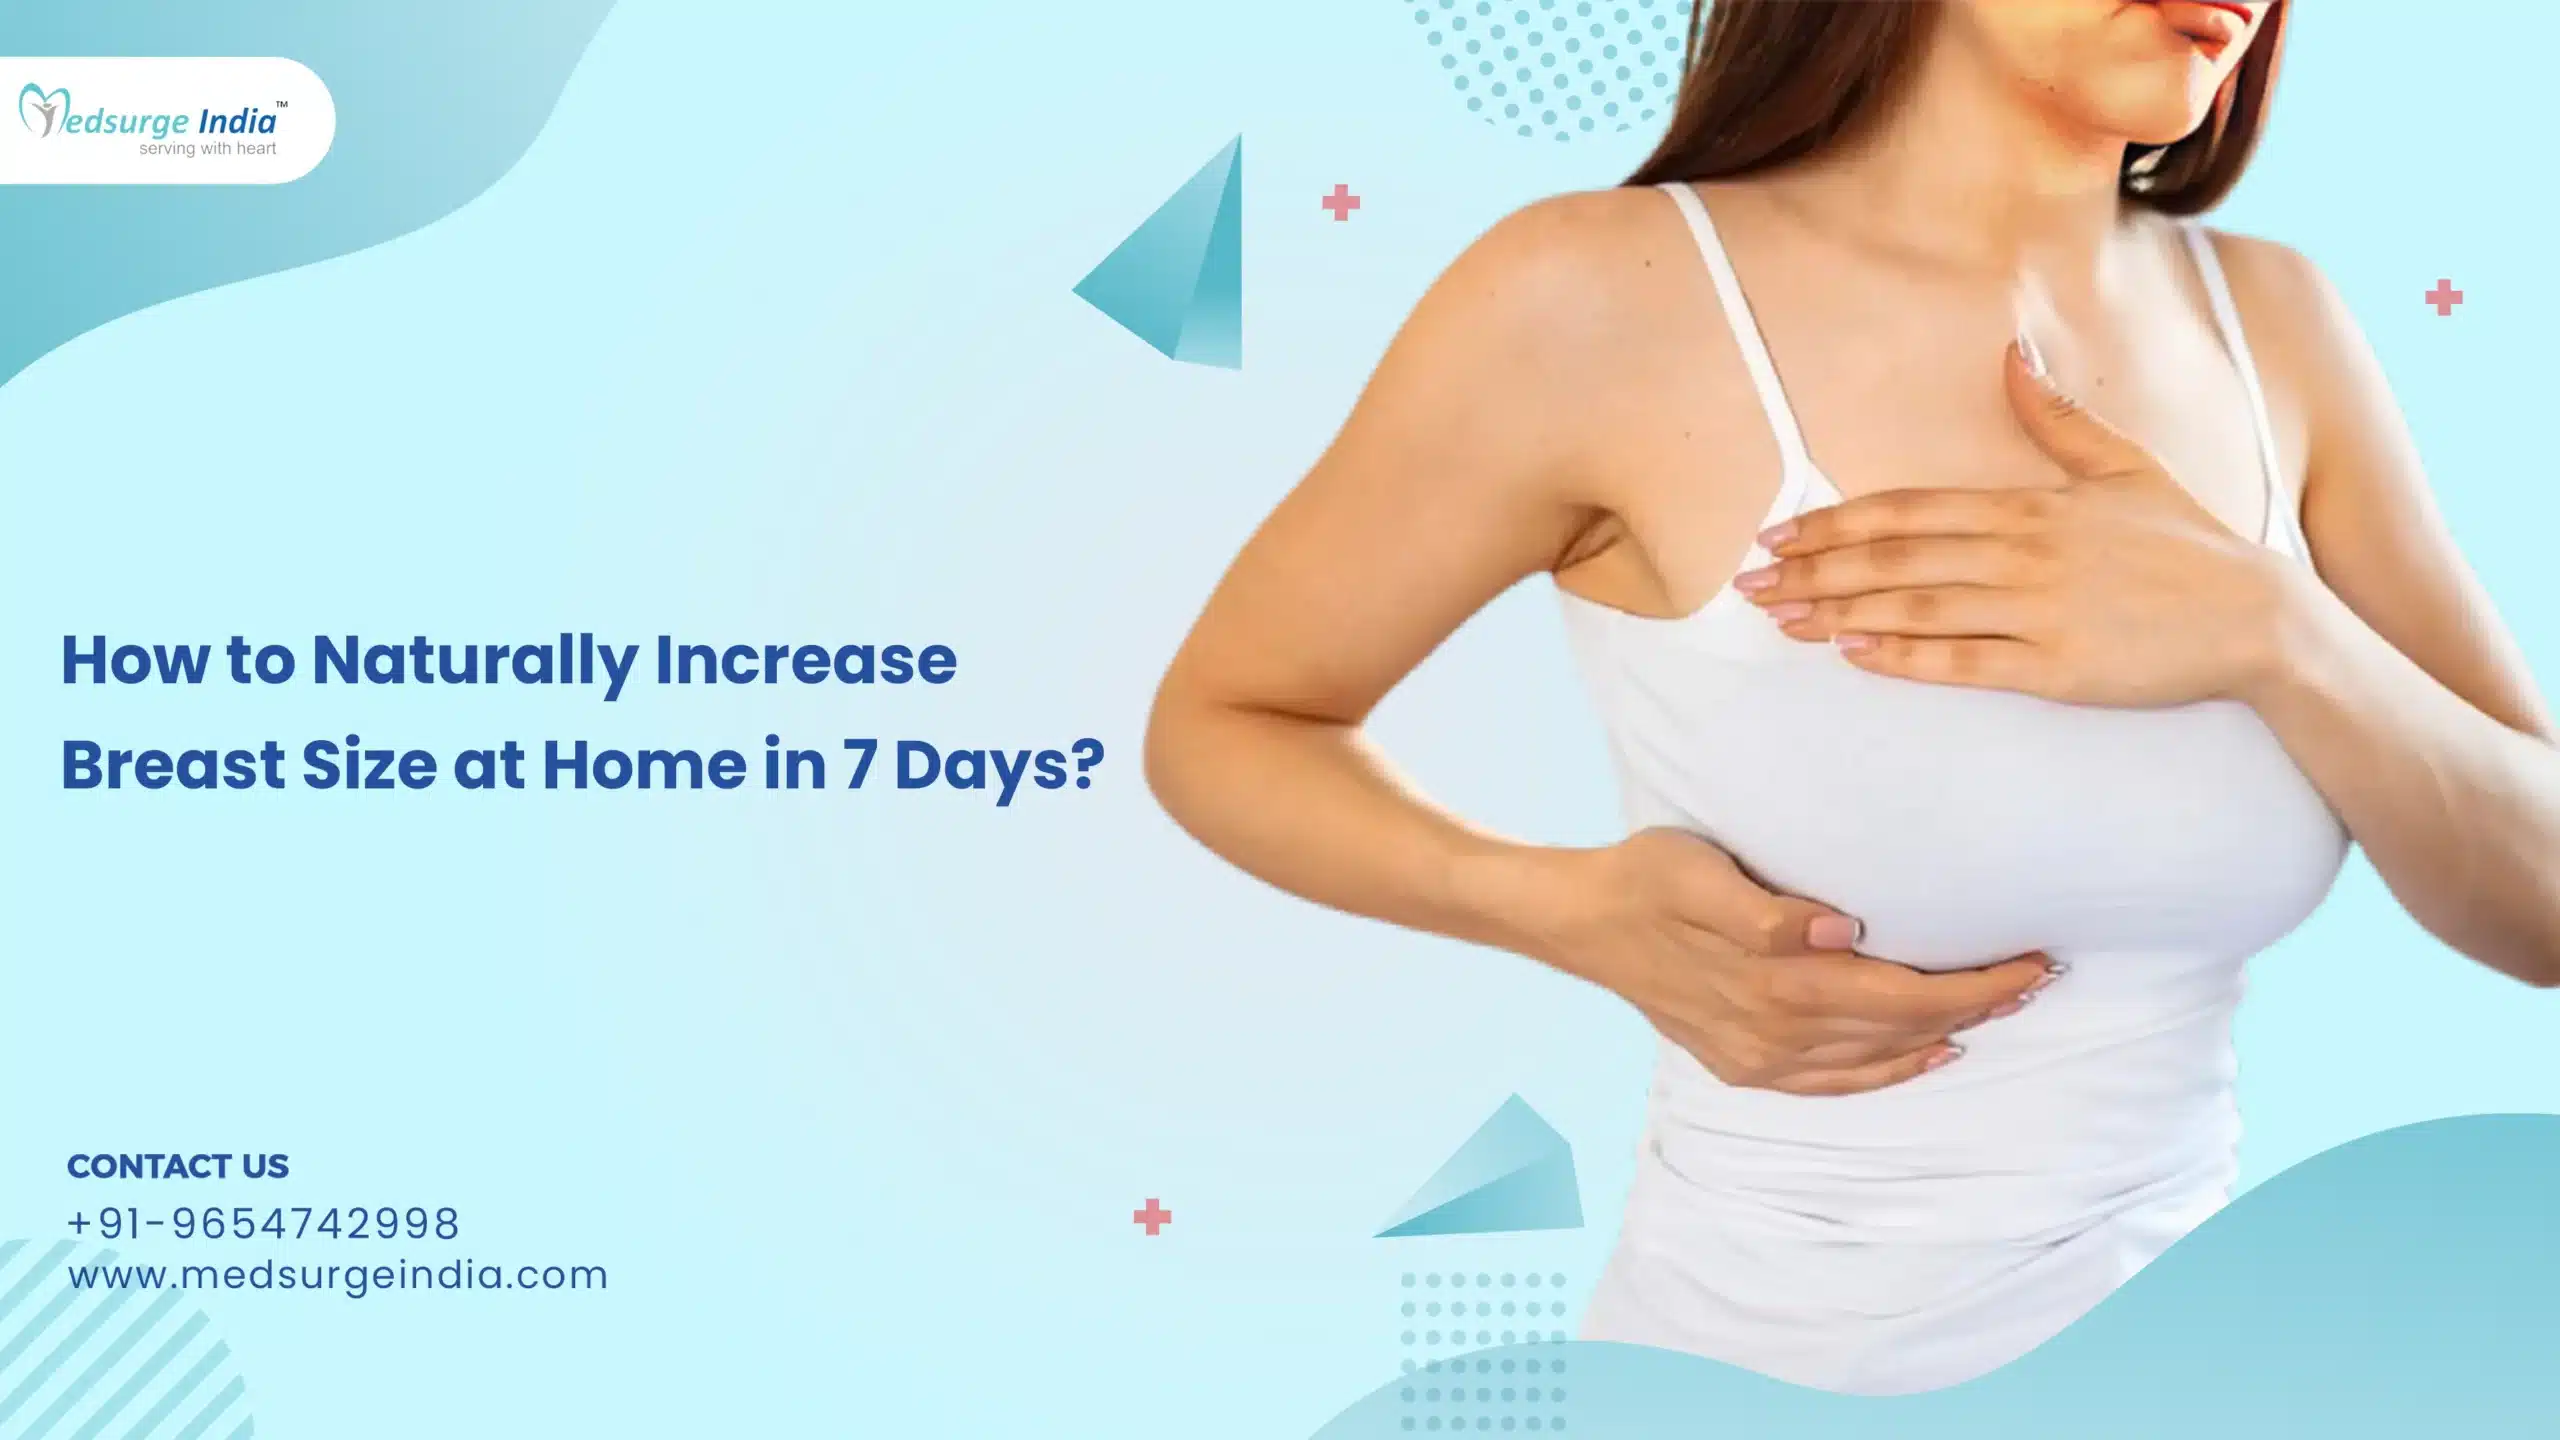 How to Naturally Increase Breast Size at Home in 7 Days